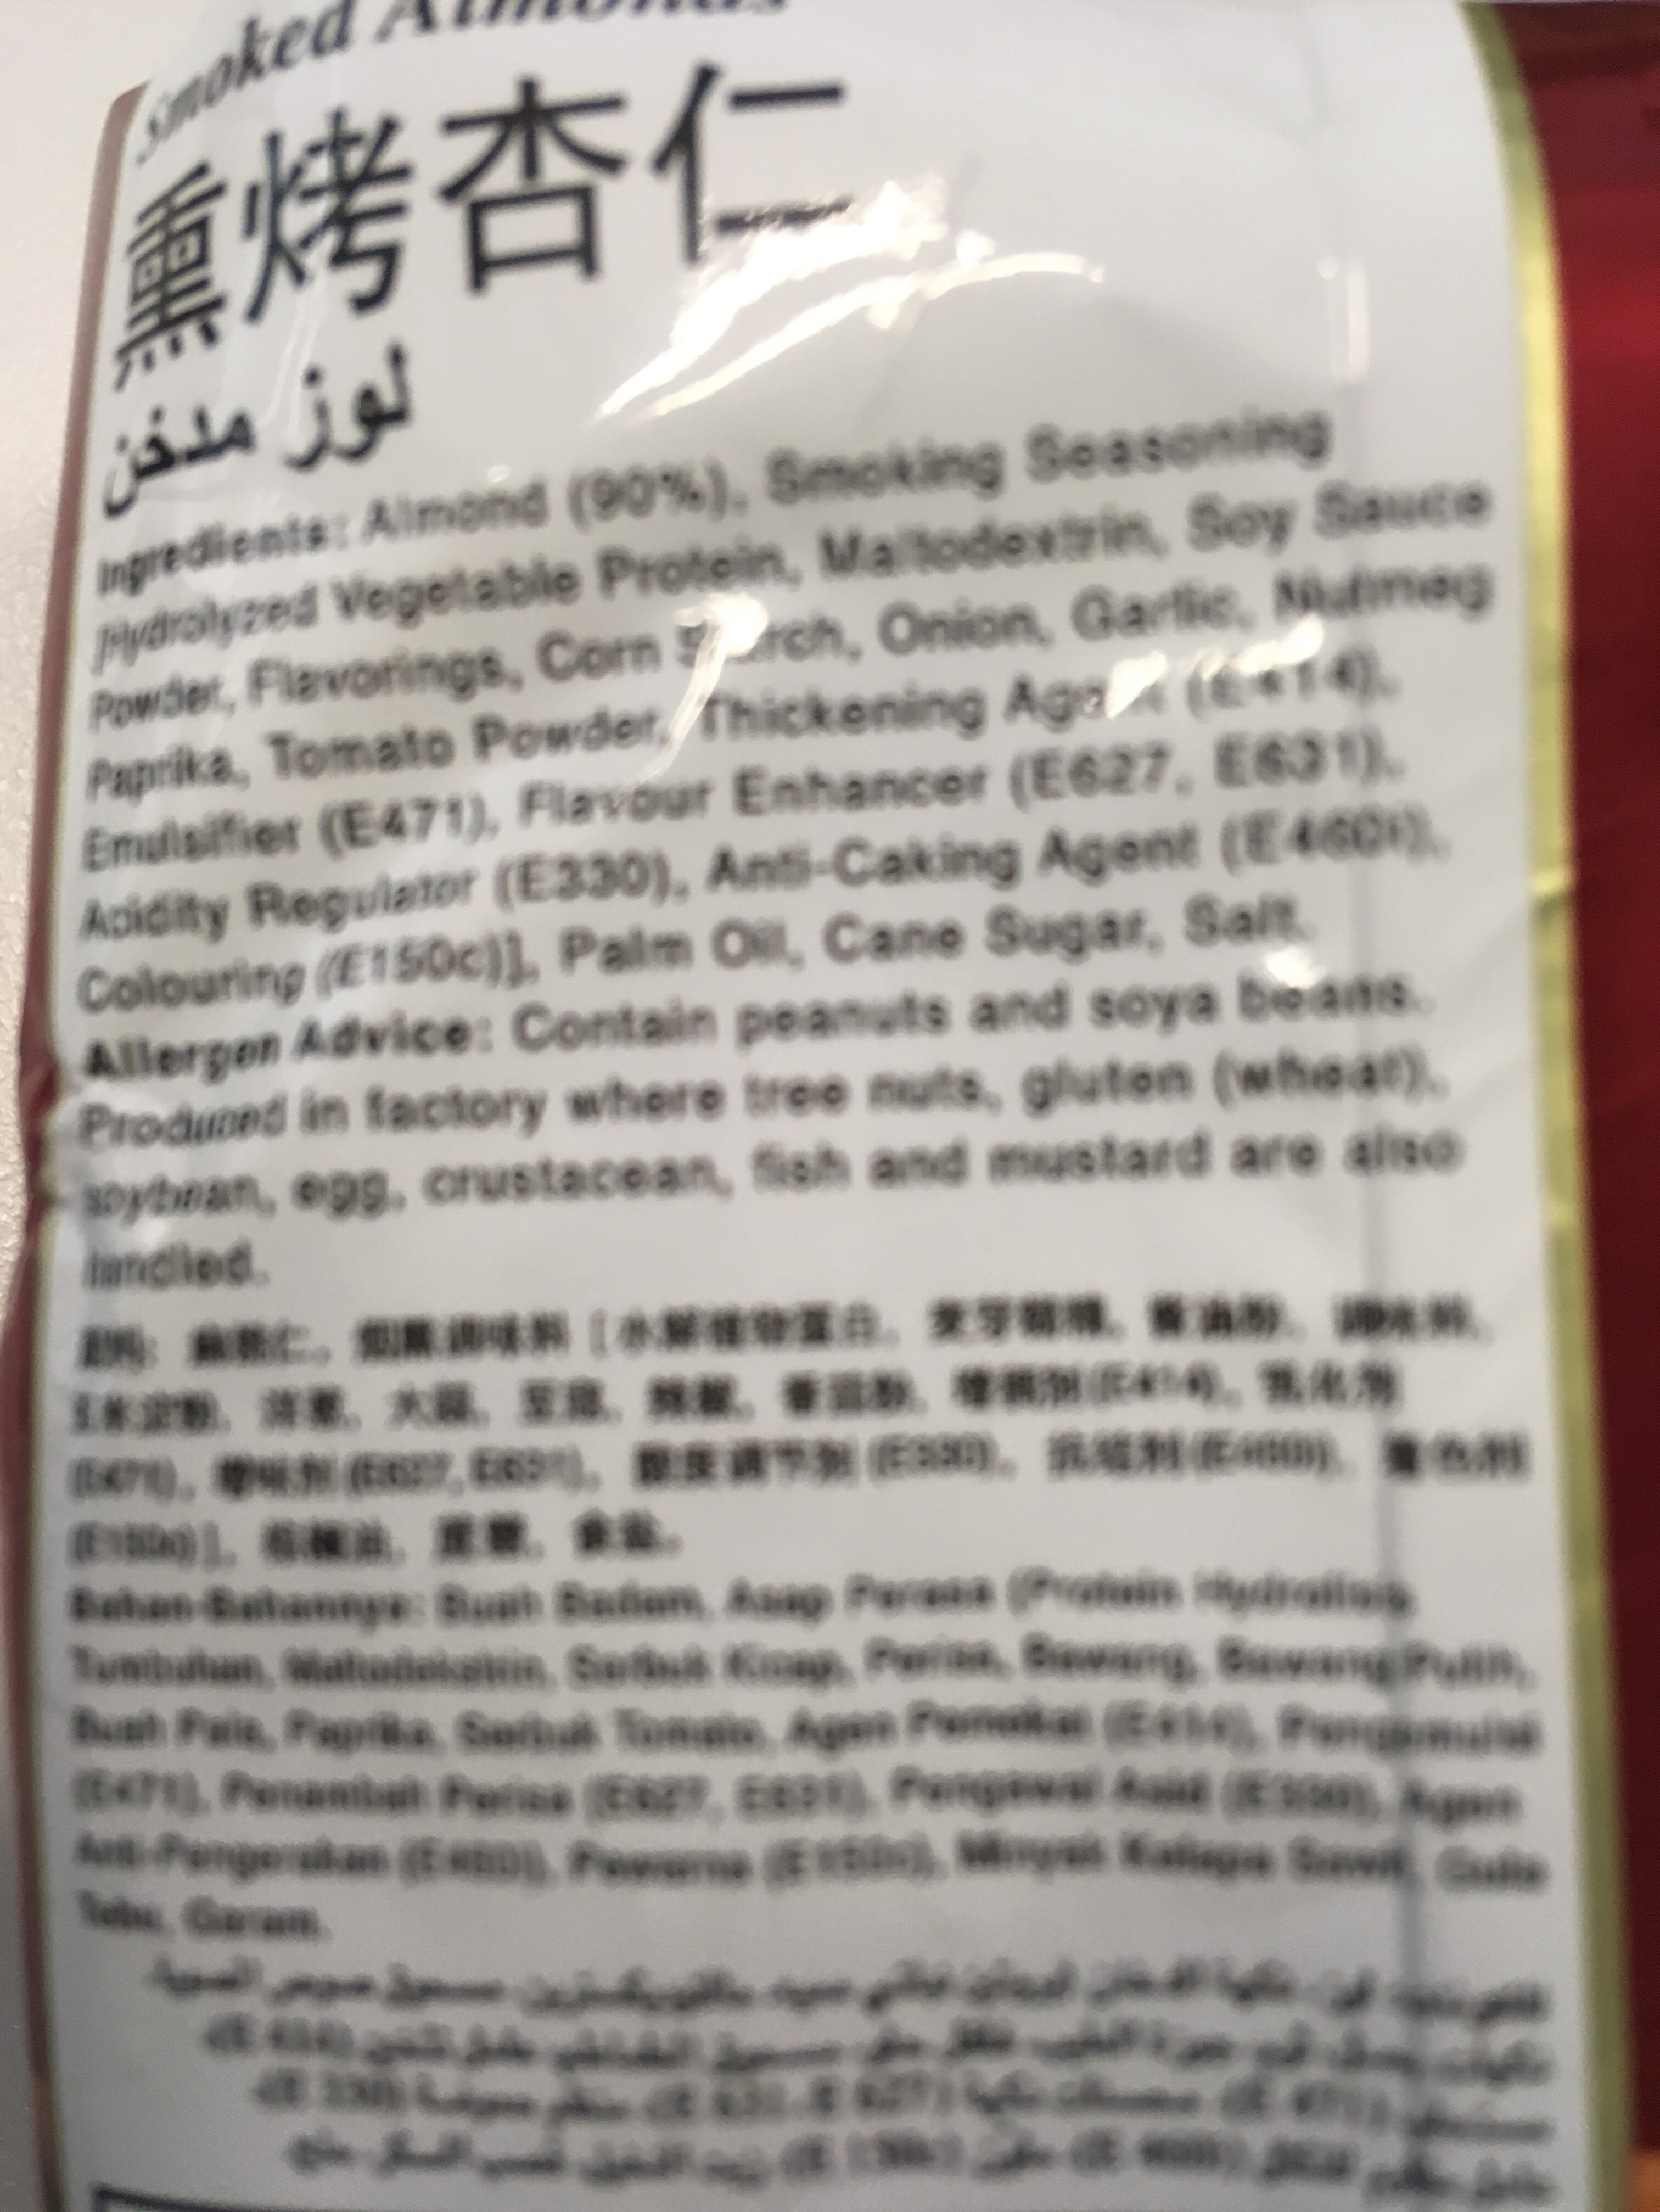 Smoked almonds - Ingredients